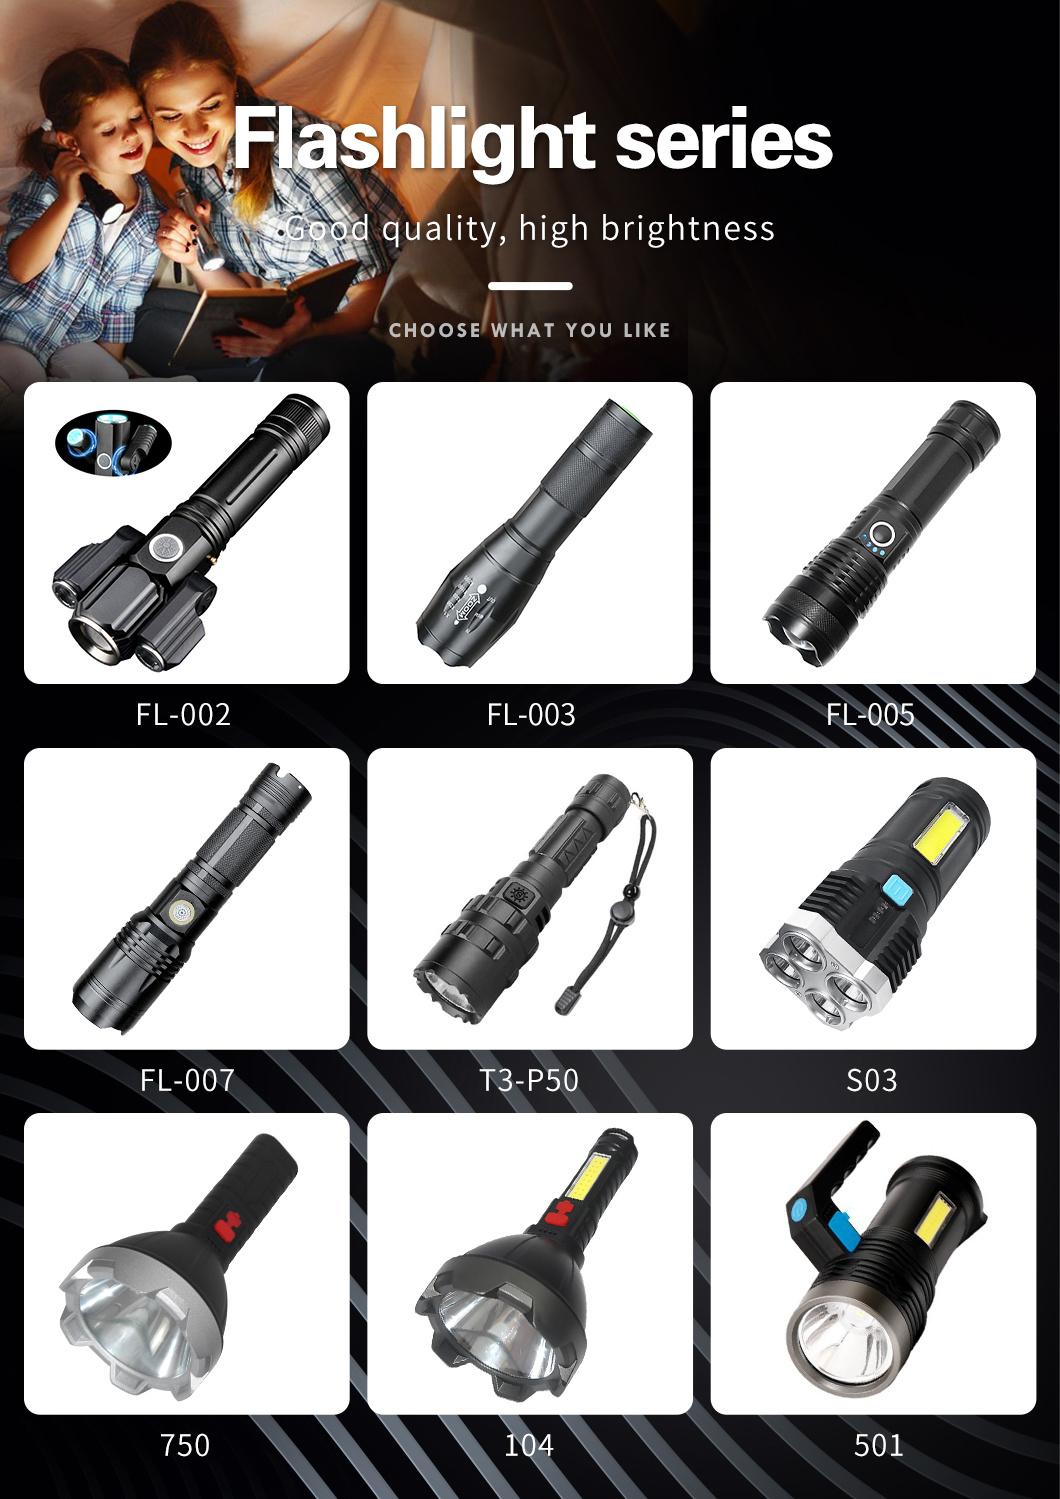 USB Rechargeable Water Proof Outdoor Camping Search and Work LED Flashlight with Zoom in and Zoom out Function